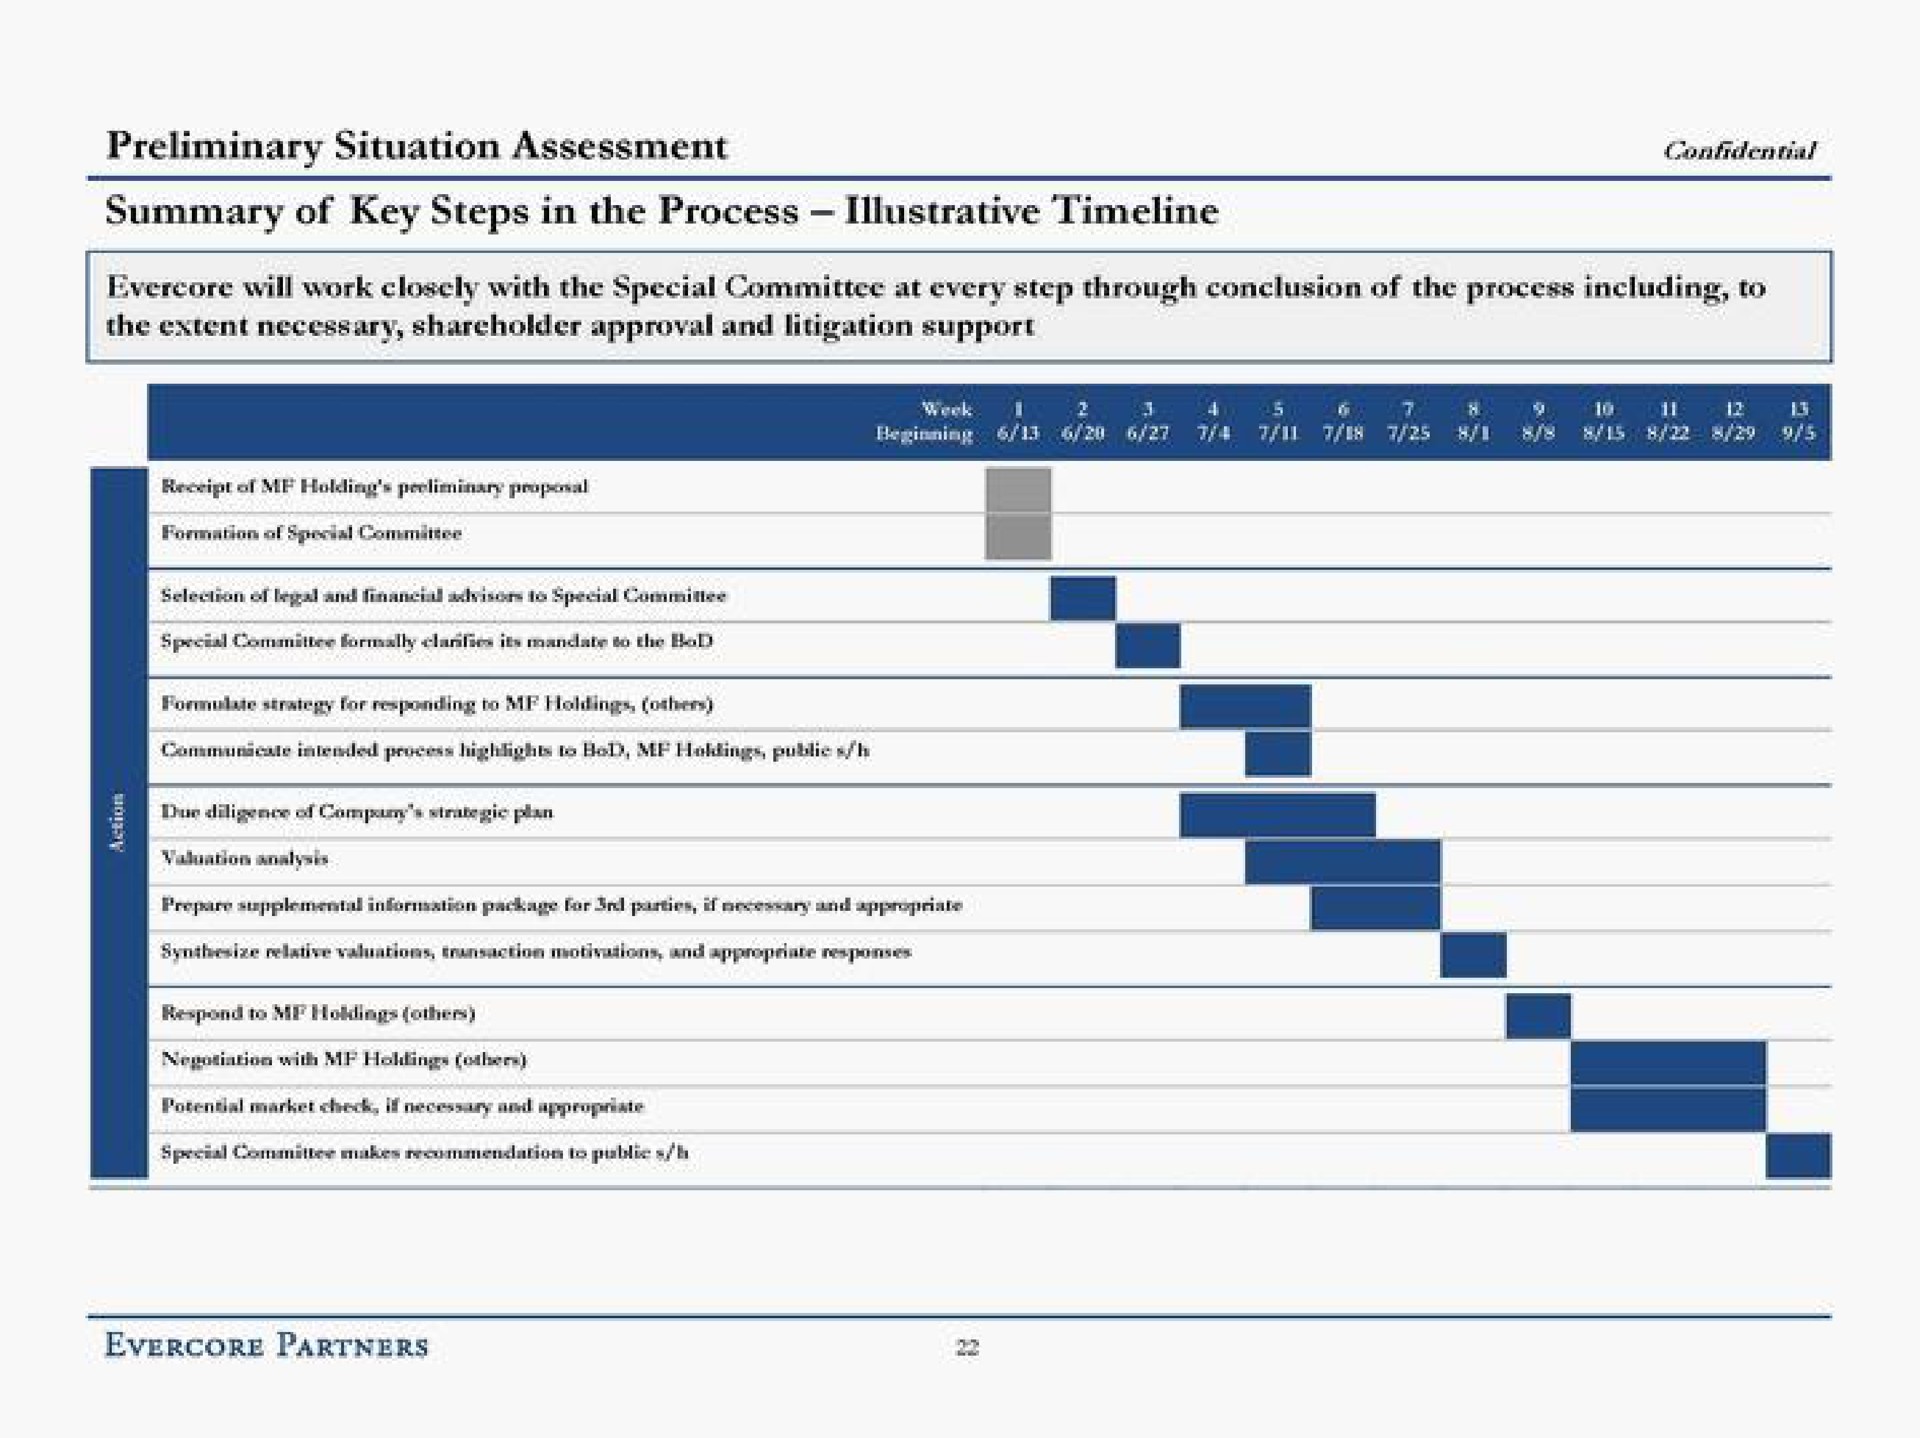 preliminary situation assessment confidential summary of key steps in the process illustrative | Evercore